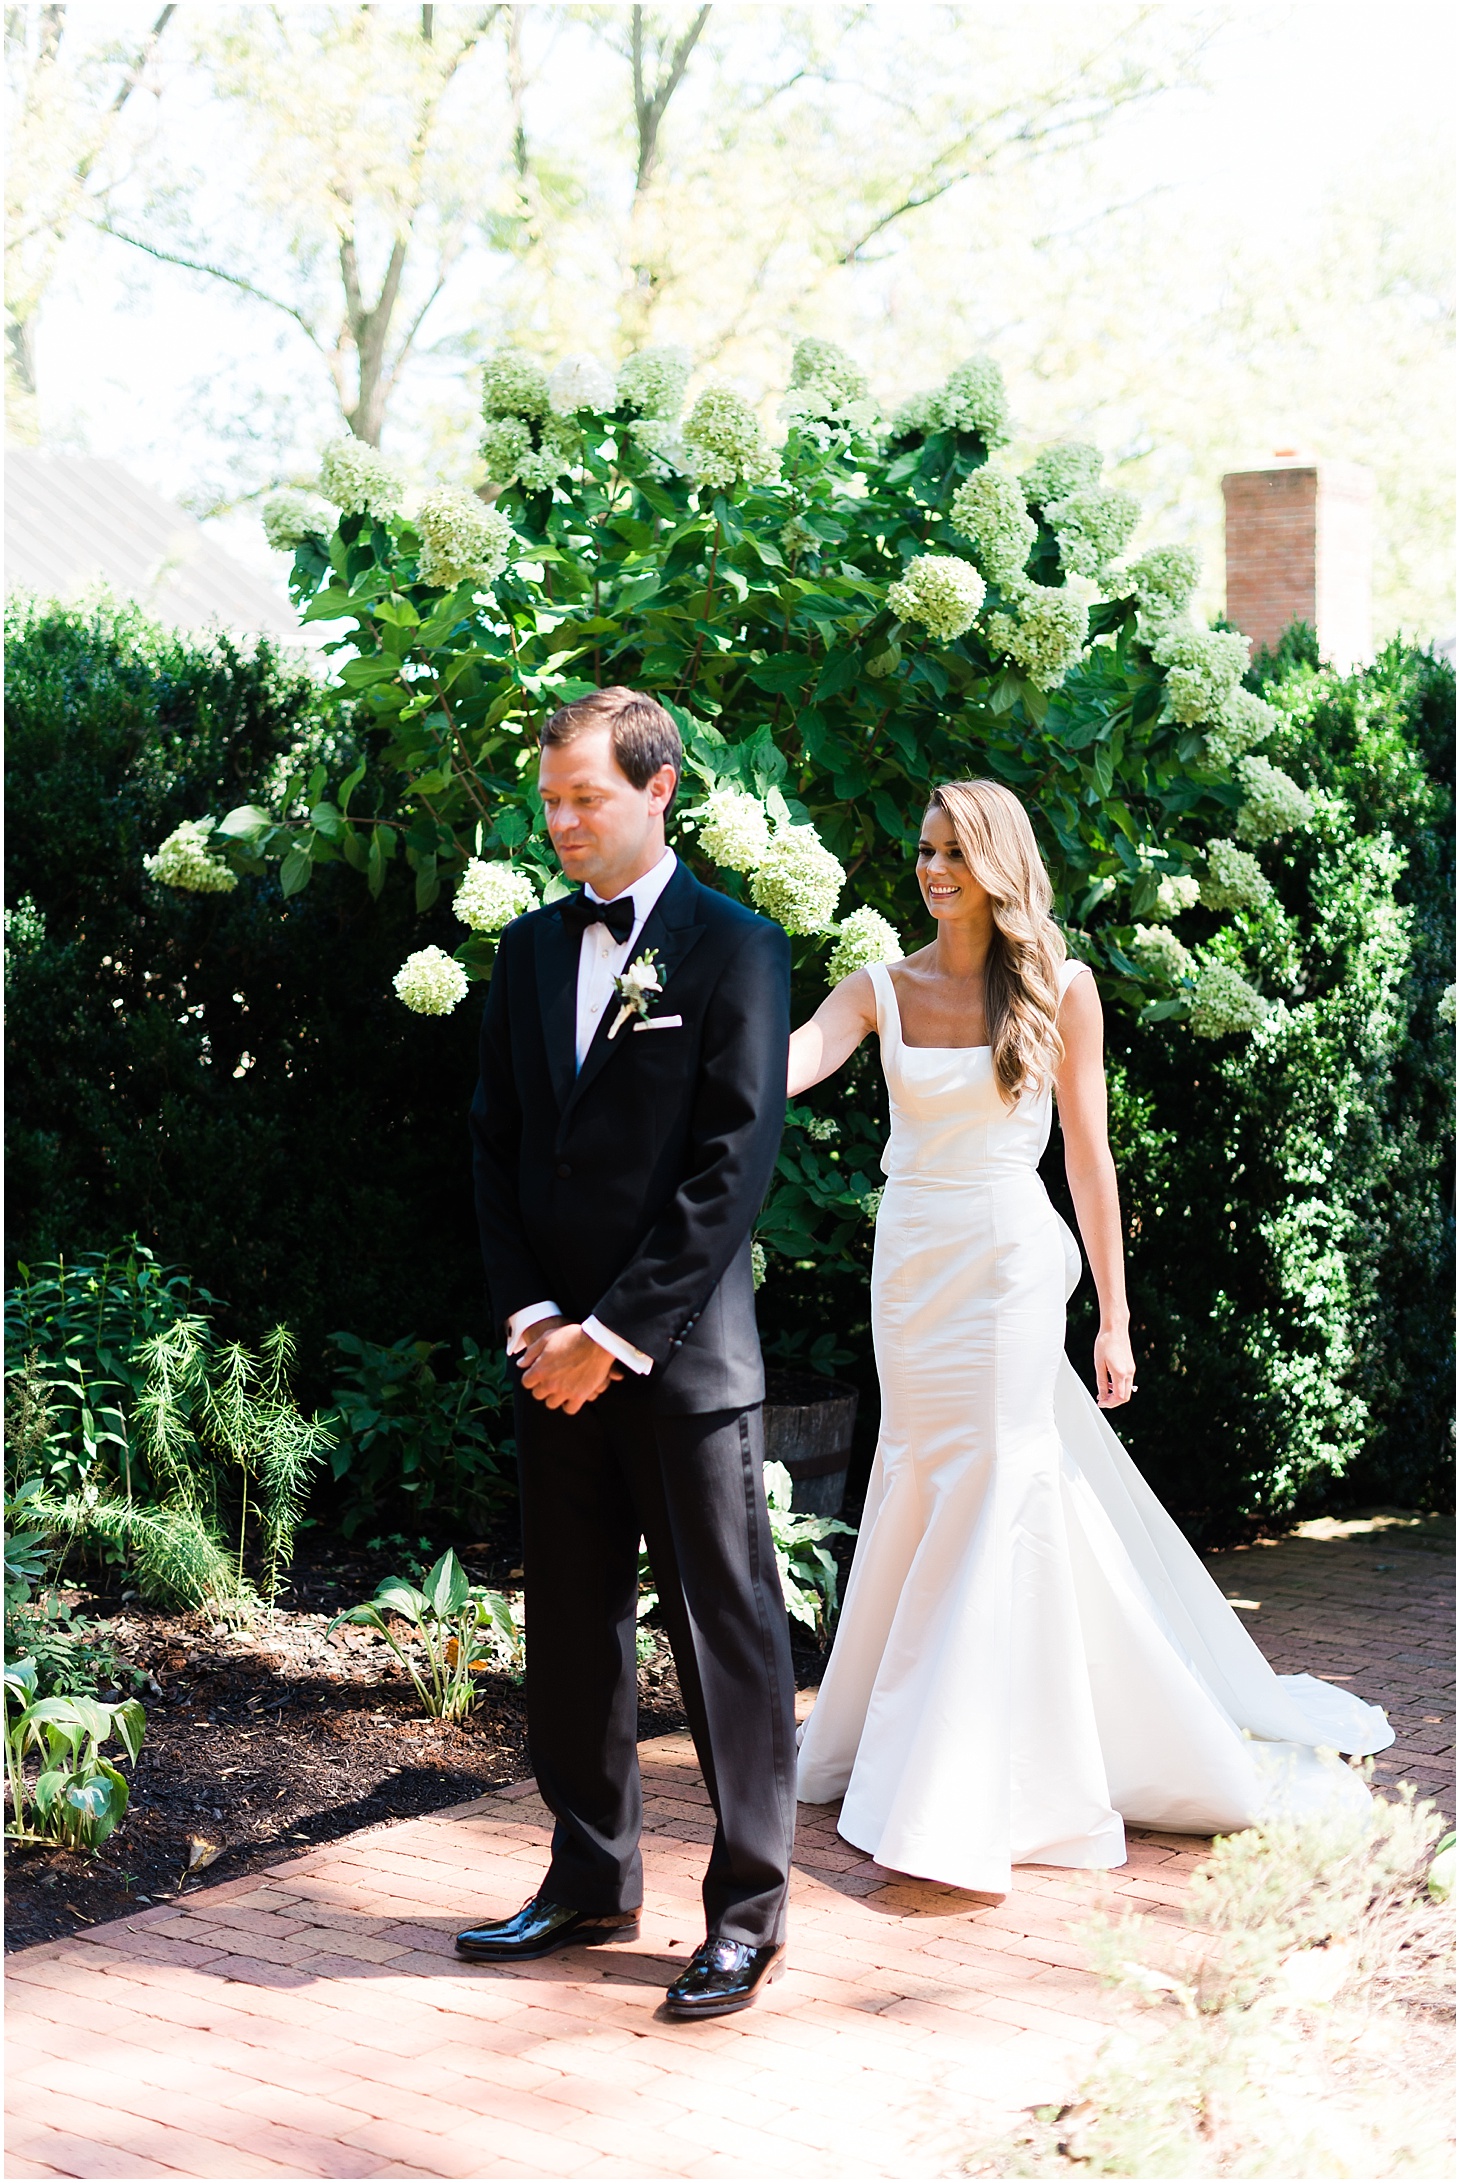 First Look at the Inn at Willow Grove, Green and White Summer Wedding at The Inn at Willow Grove, Ceremony at St. Isidore the Farmer Catholic Church, Sarah Bradshaw Photography, DC Wedding Photographer